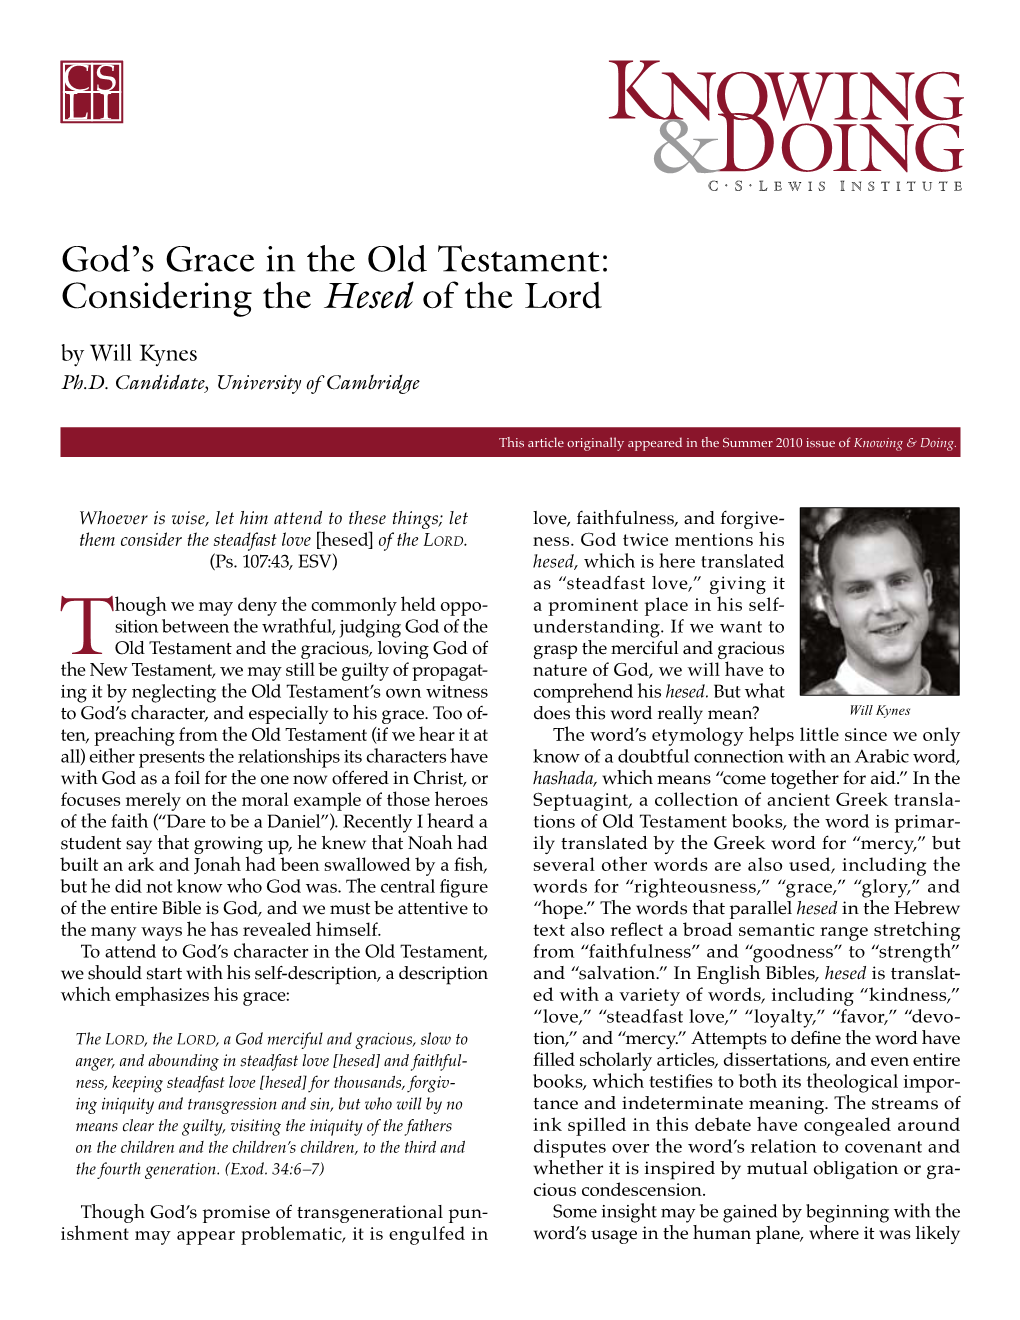 Considering the Hesed of the Lord by Will Kynes Ph.D